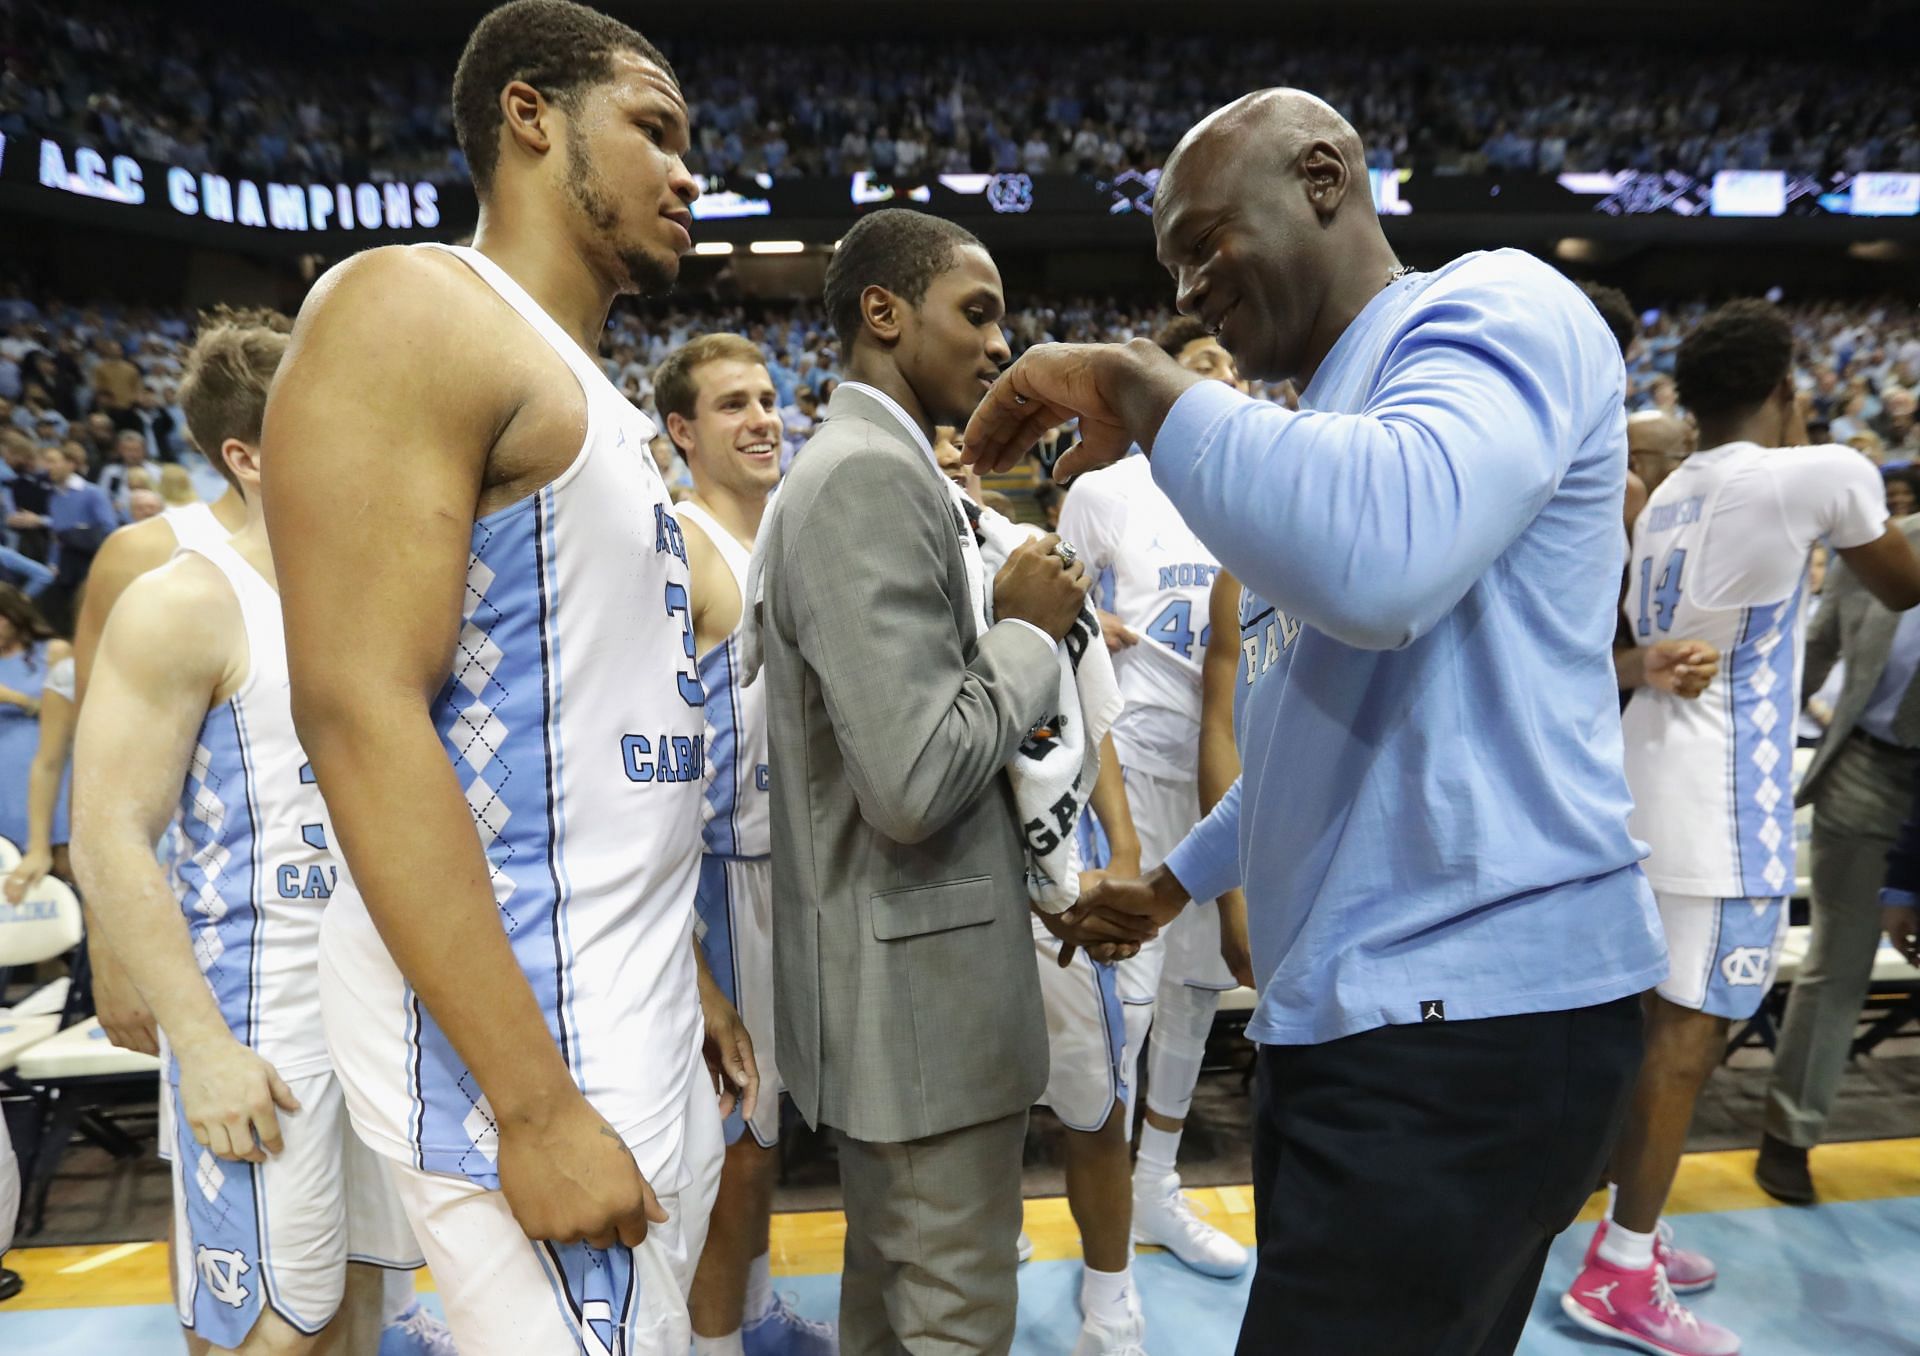 Michael Jordan is one of the most competitive North Carolina alumni, which alum Kenny Smith highlights.